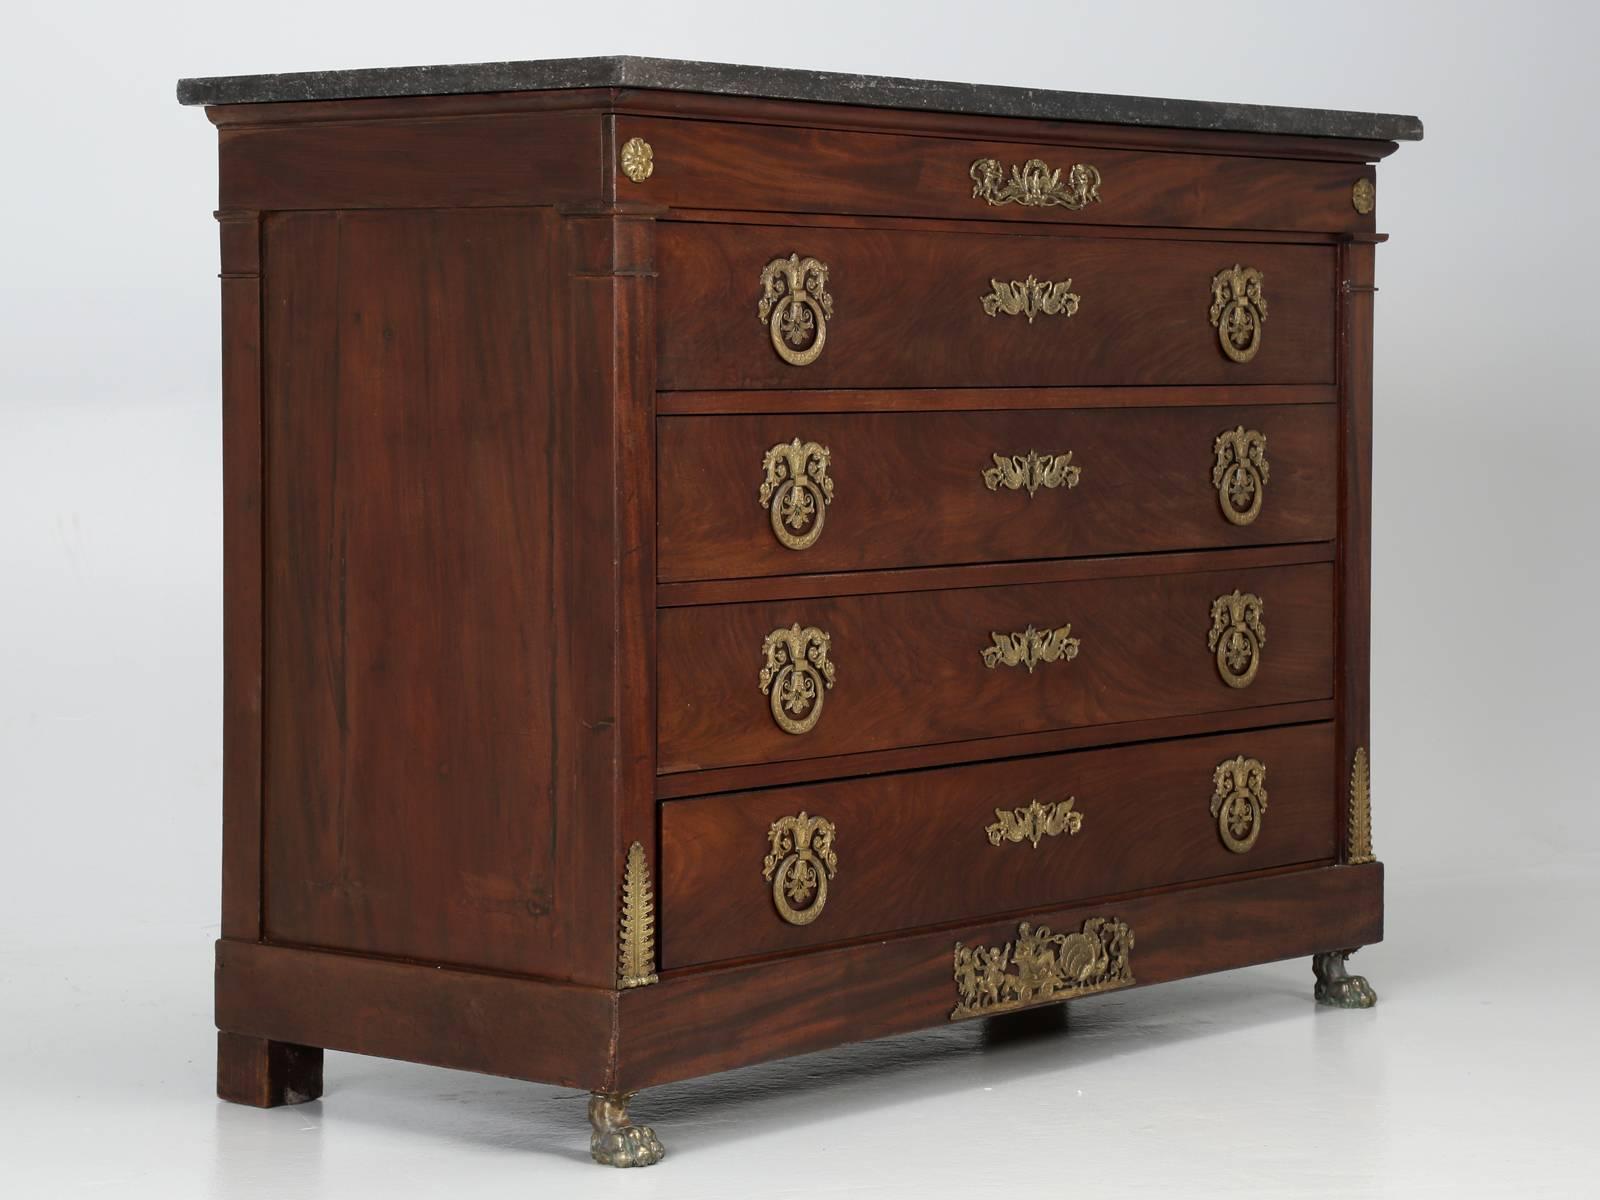 Our antique French Commode or Dresser, was constructed during the Bourbon Restoration period of French history, following the demise of Napoleon in 1814, until the July Revolution of 1830. The brothers of Louis XVI of France, came into power and